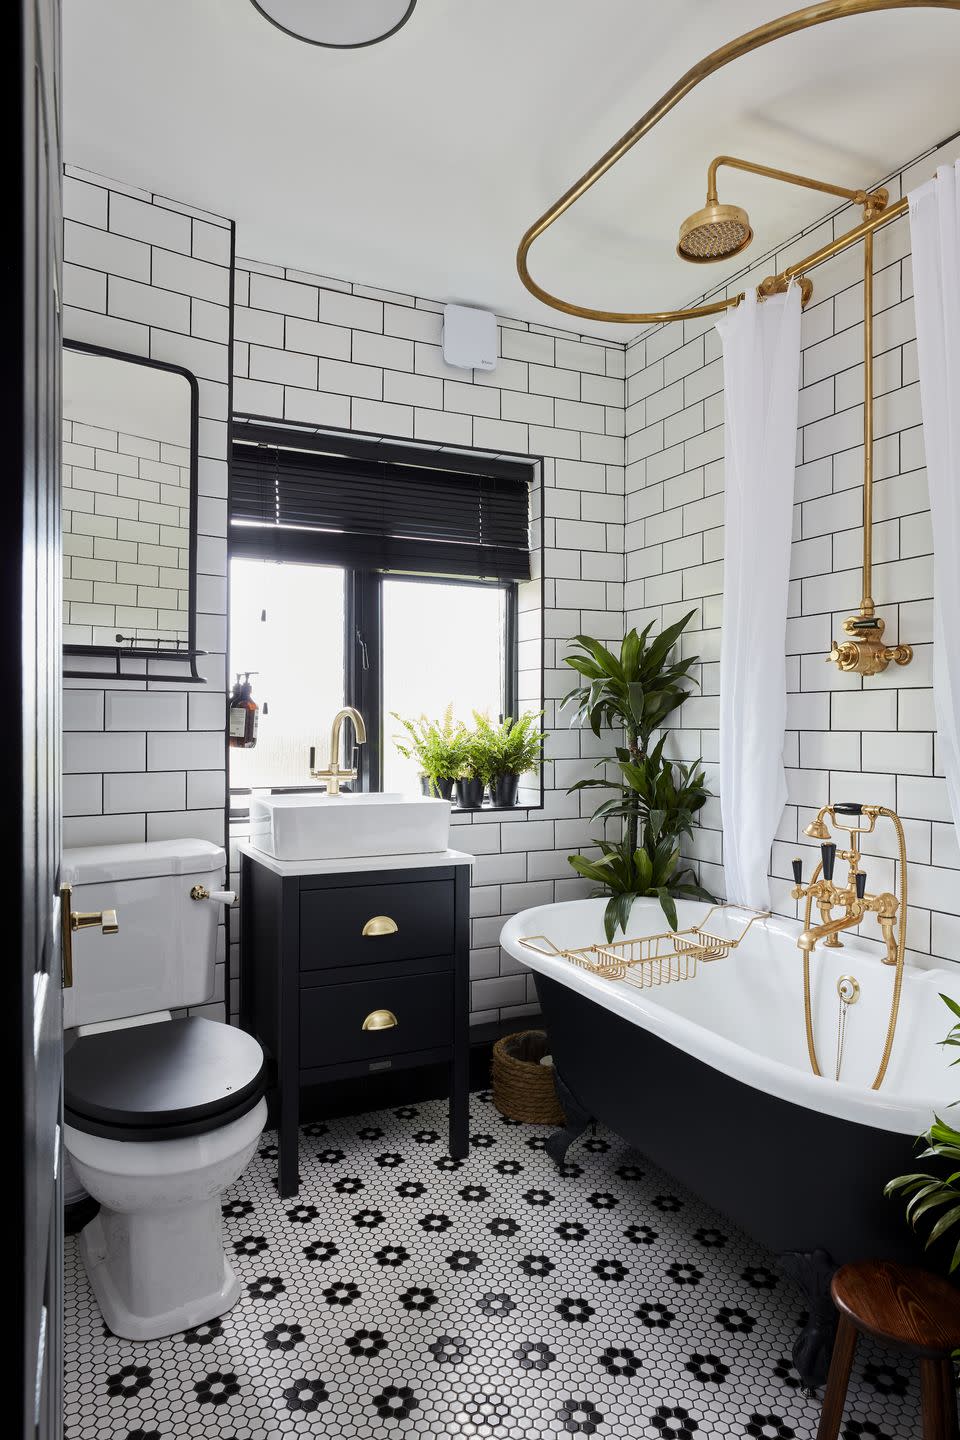 monochrome bathroom with patterned daisy print tiles, brass fittings and a black freestanding bathtub